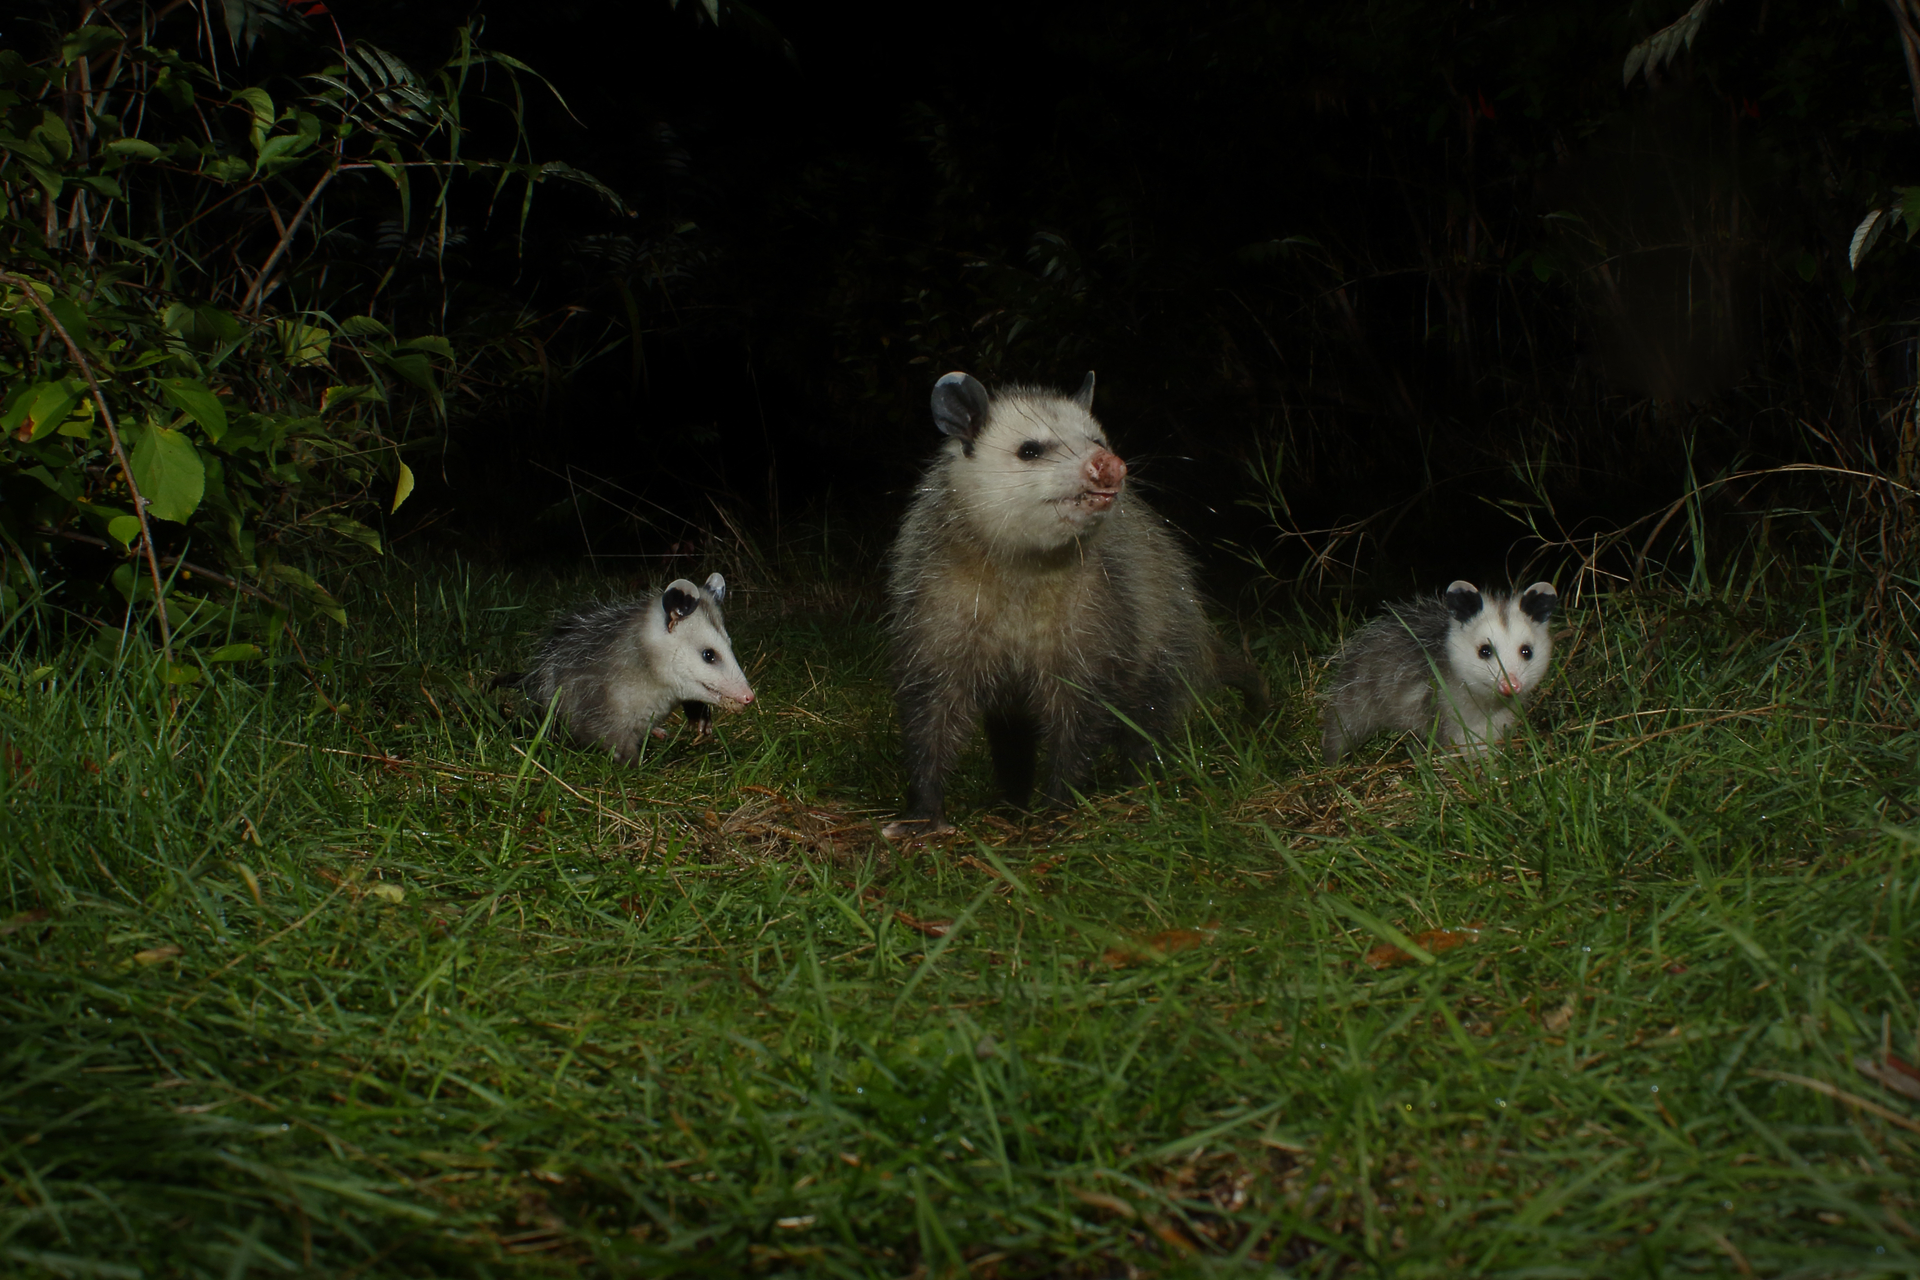 Three opossums, one larger one in the middle and two smaller ones on the side, walking in the grass at night.